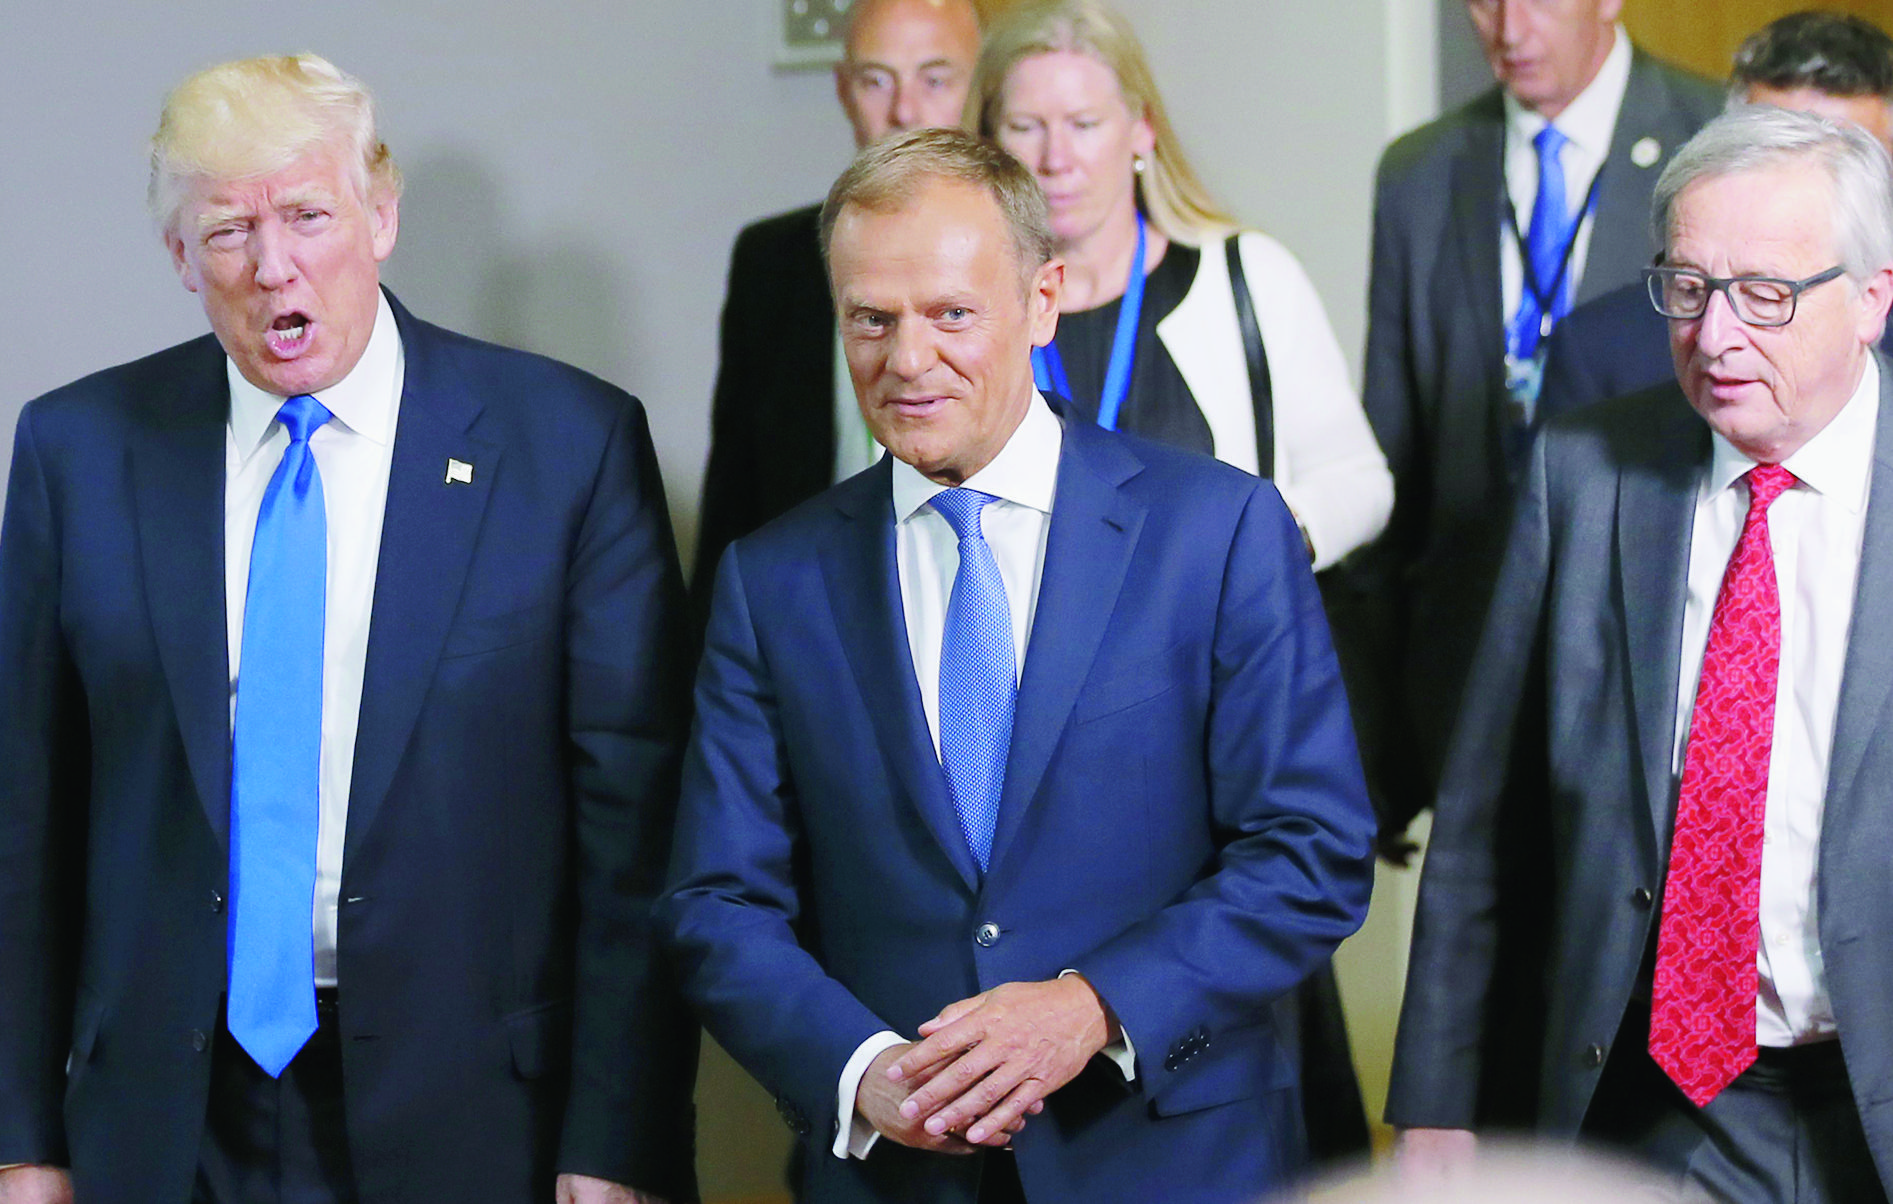 epa05988457 US President Donald J. Trump (L) chats with the President of the European Council Donald Tusk (C) and the President of the European Commission Jean-Claude Juncker (R) at the end of their meeting at the European Council, in Brussels, Belgium, 25 May 2017. Trump is in Belgium to attend a North Atlantic Treaty Organization (NATO) Summit and to meet EU leaders.  EPA/ROBERT GHEMENT BELGIUM EU USA DIPLOMACY